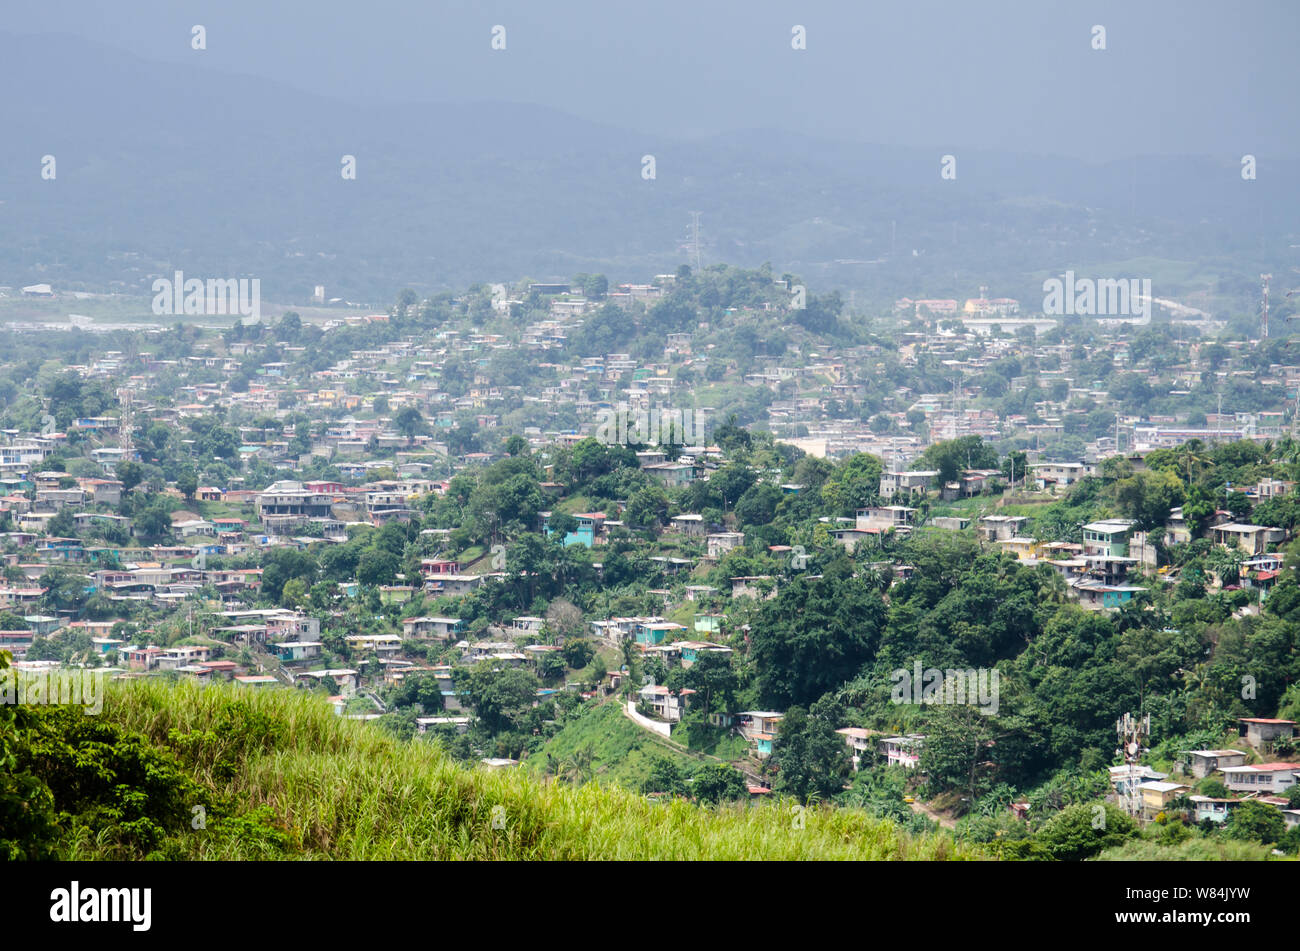 View of a populated area of San Miguelito special district inside Panama City. Stock Photo